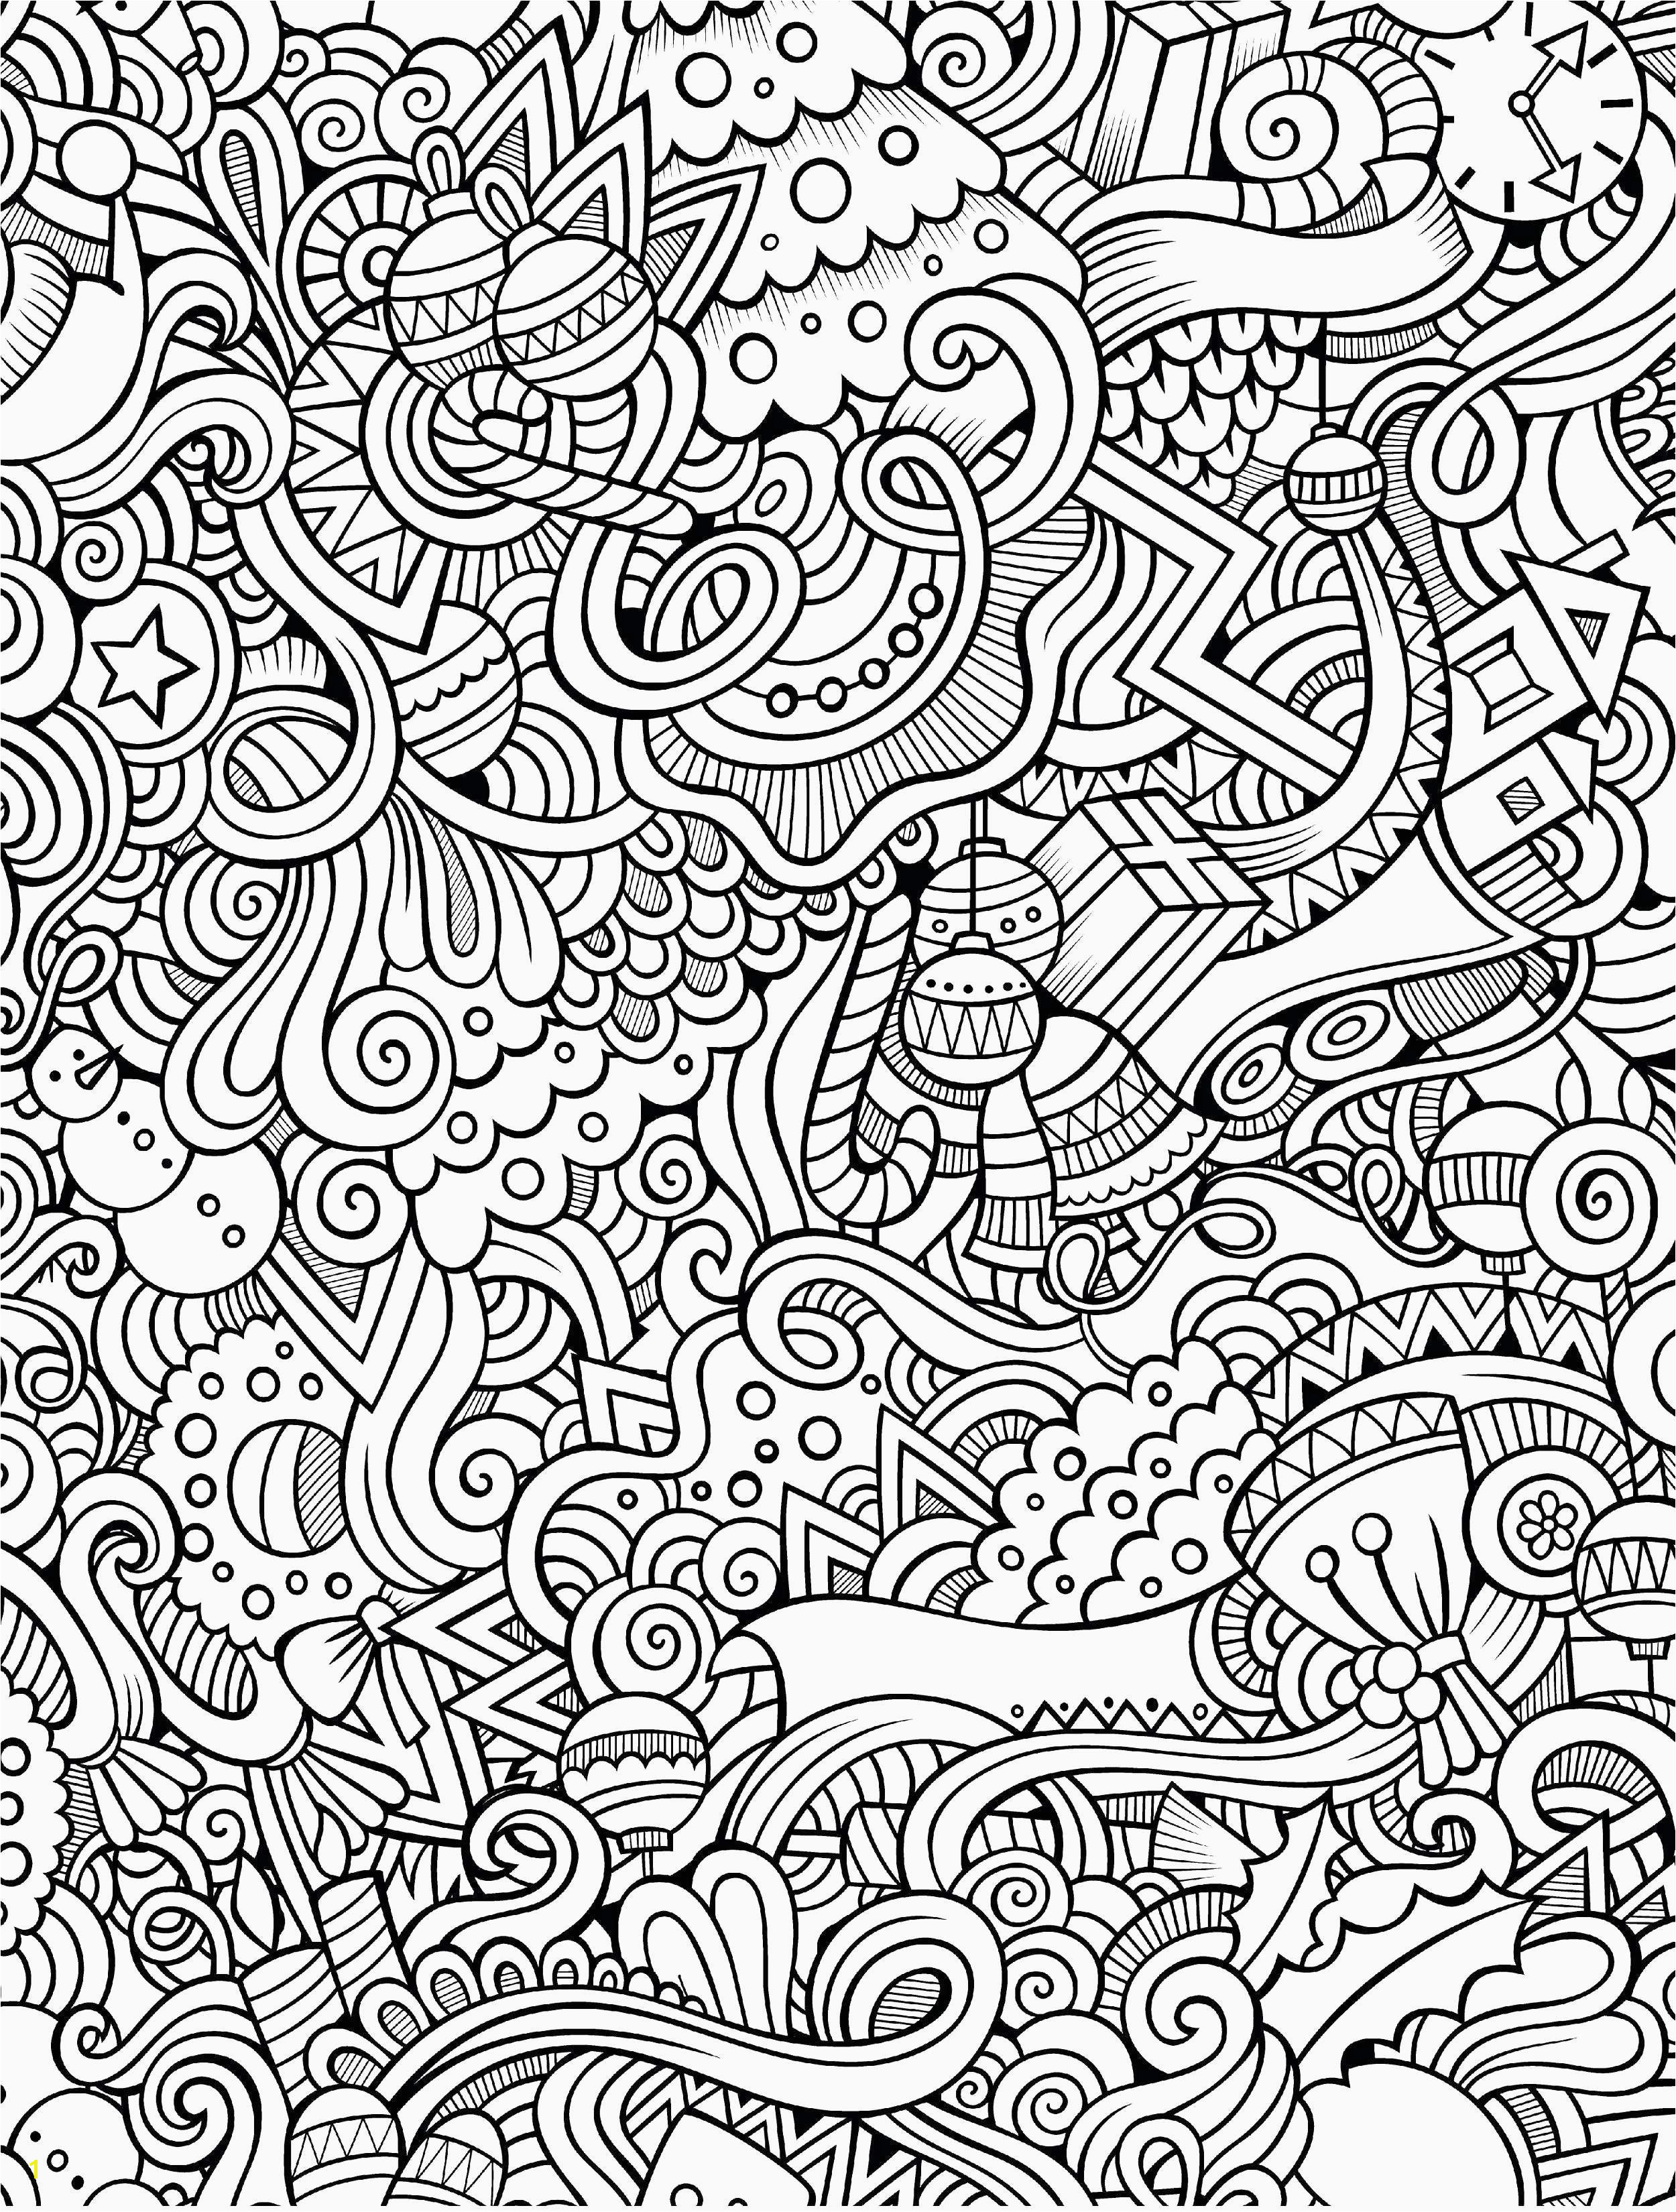 0d B4 2c Free Printable Coloring Sheet Inspirational Coloring Pages for Adults Abstract